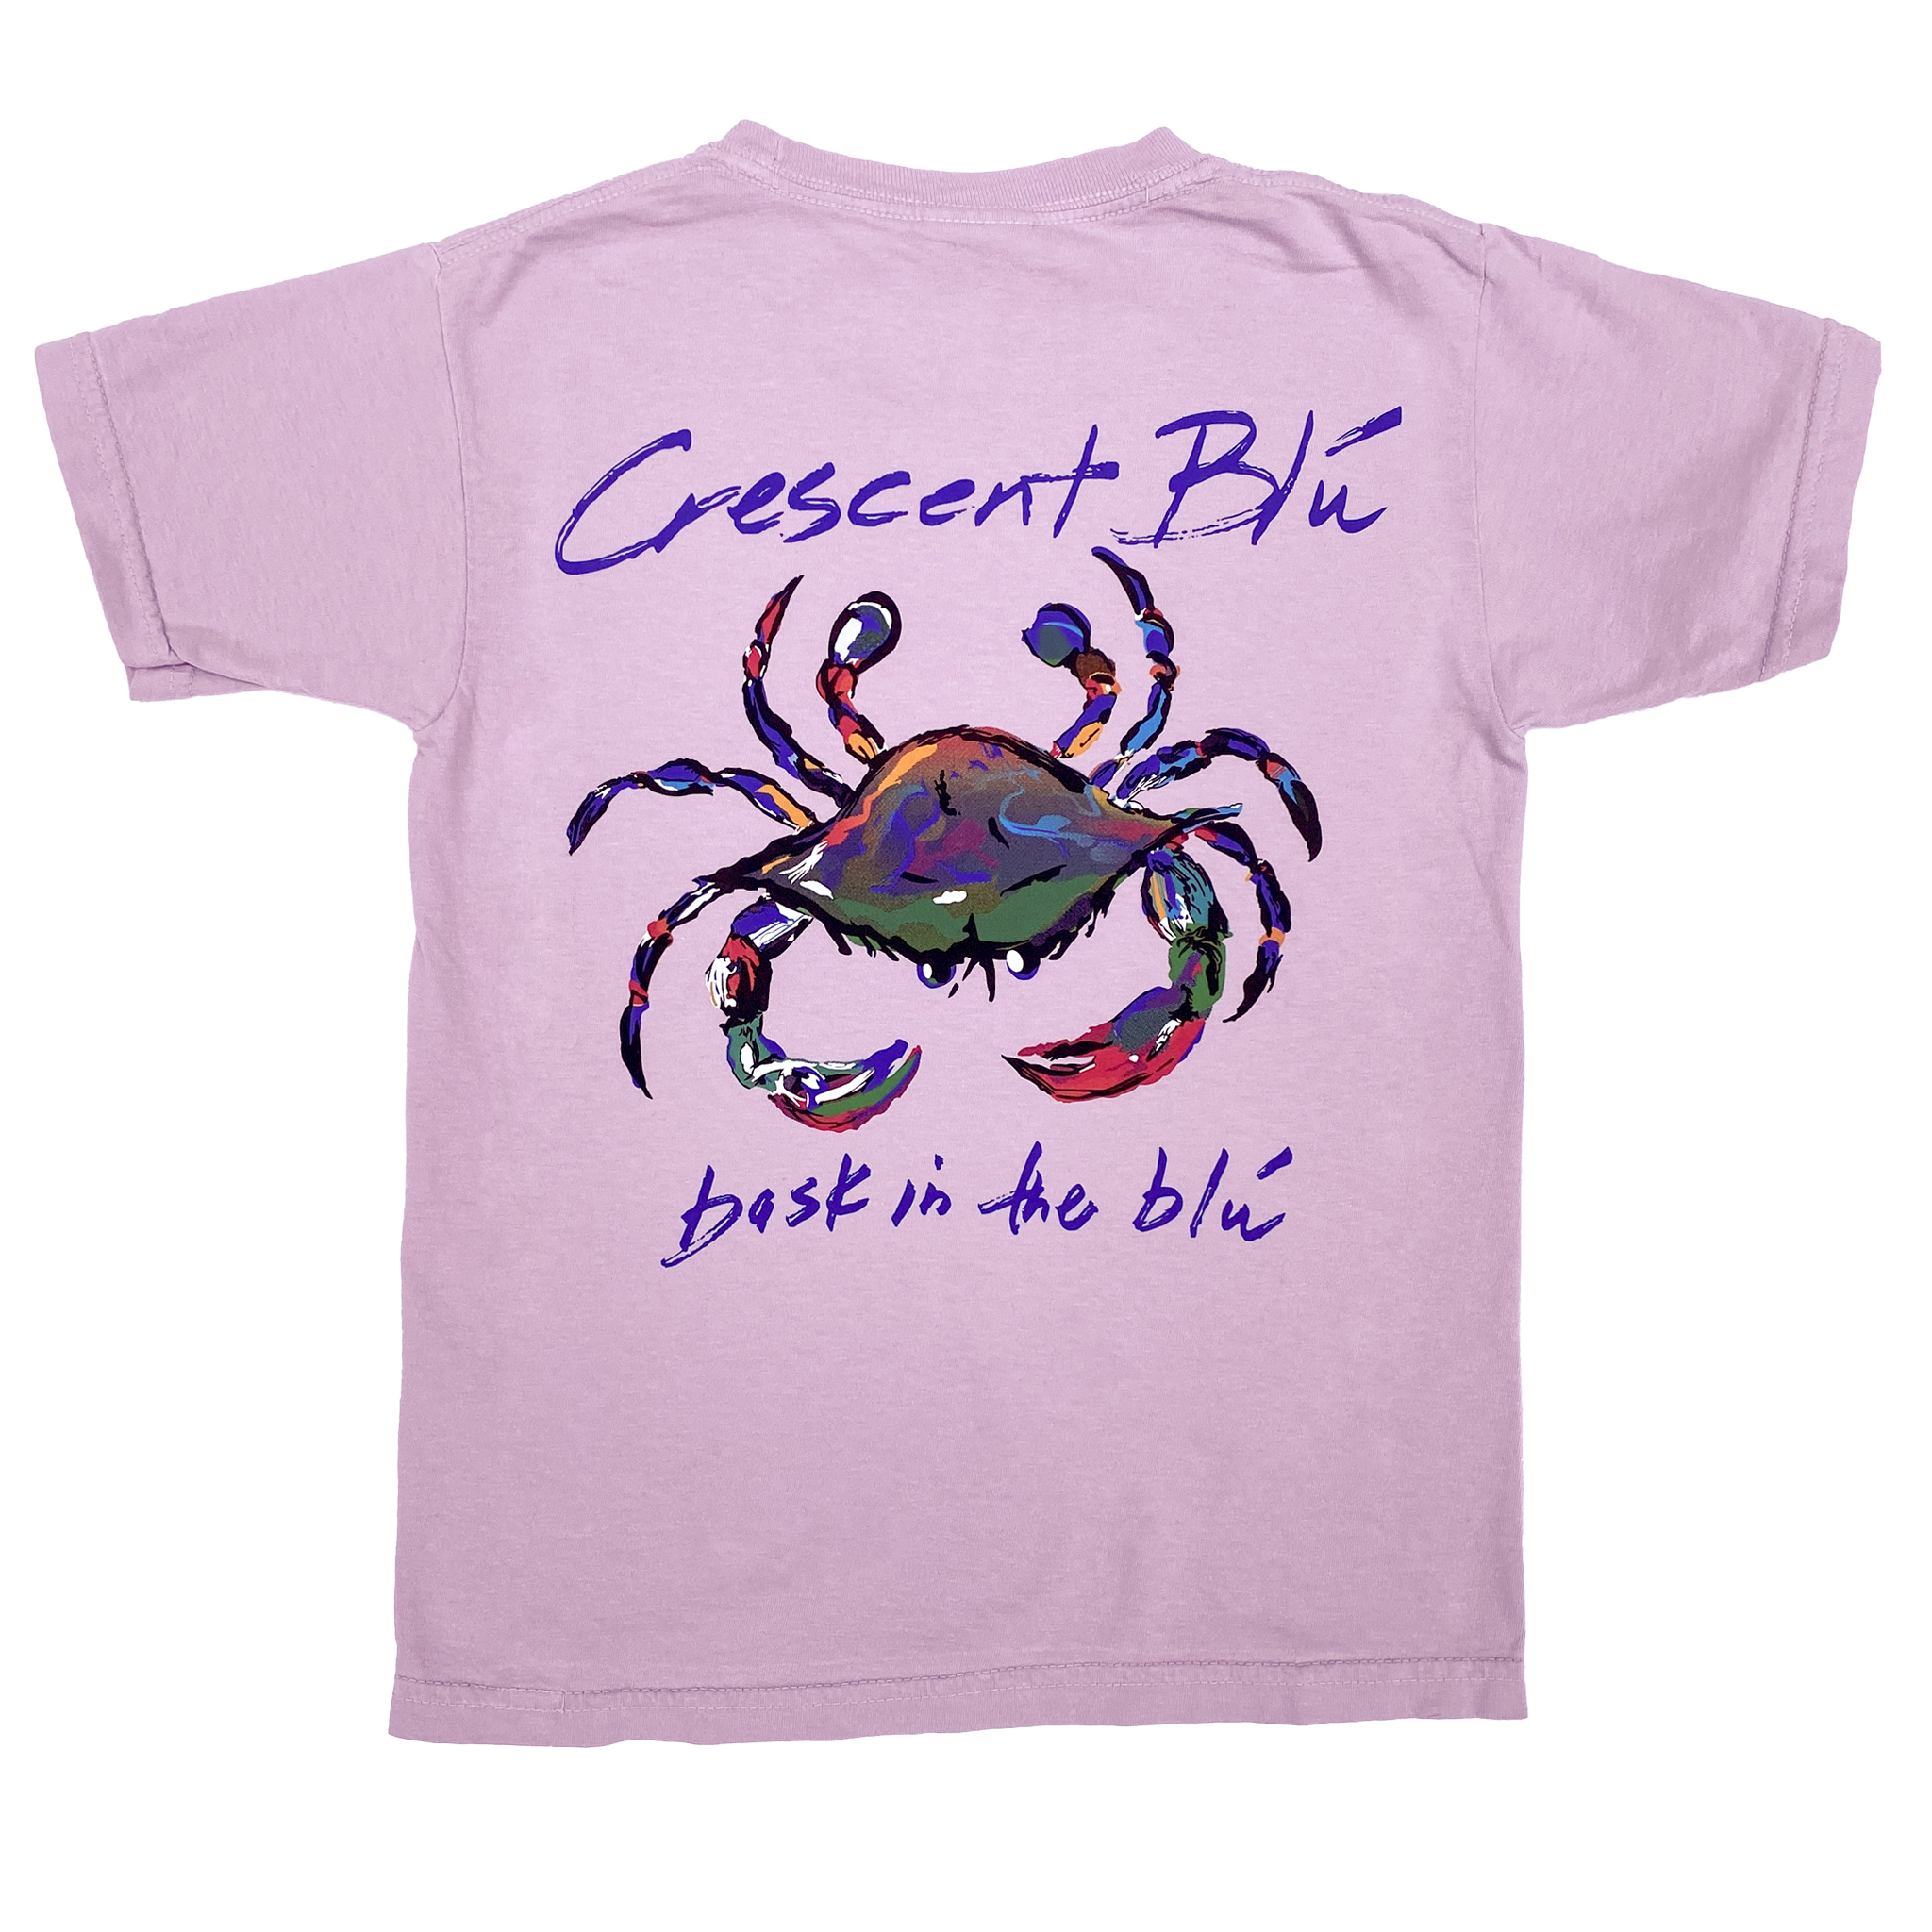 Back of a short sleeve youth orchid tee cotton tee with a colorful blue crab/